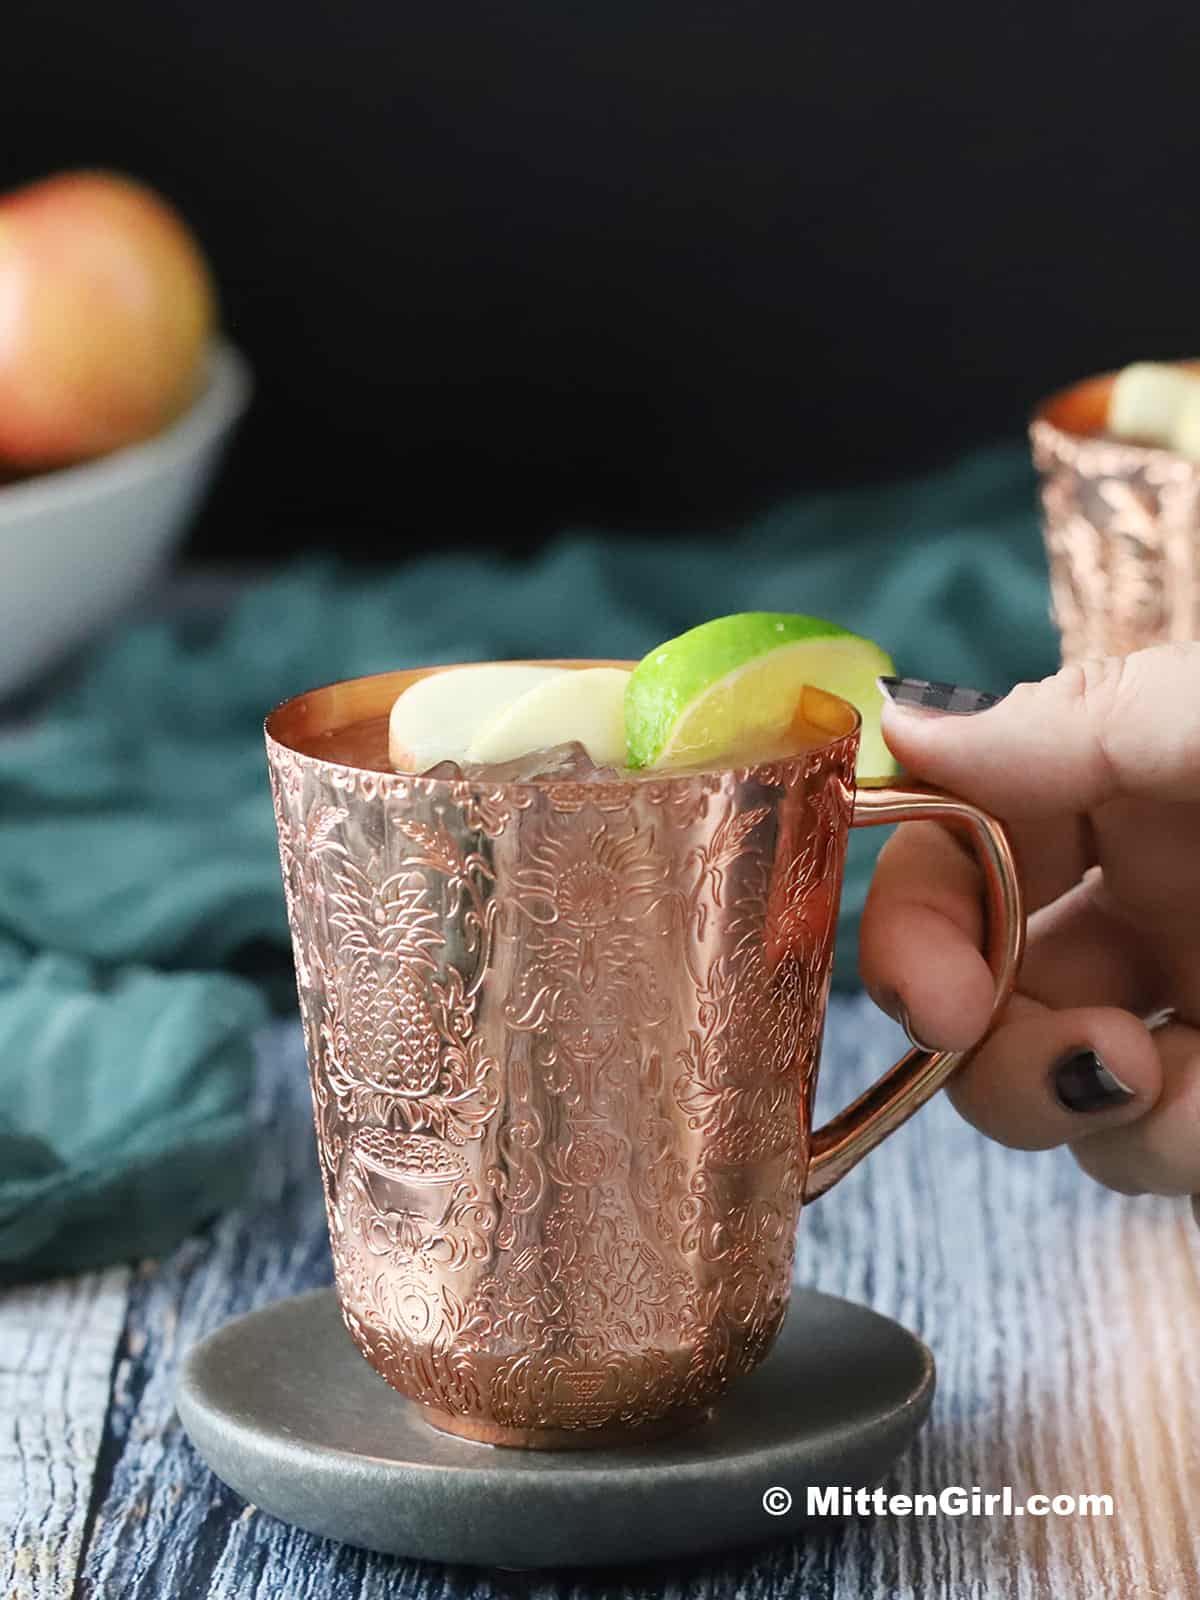 A hand reaching out for a copper mug.